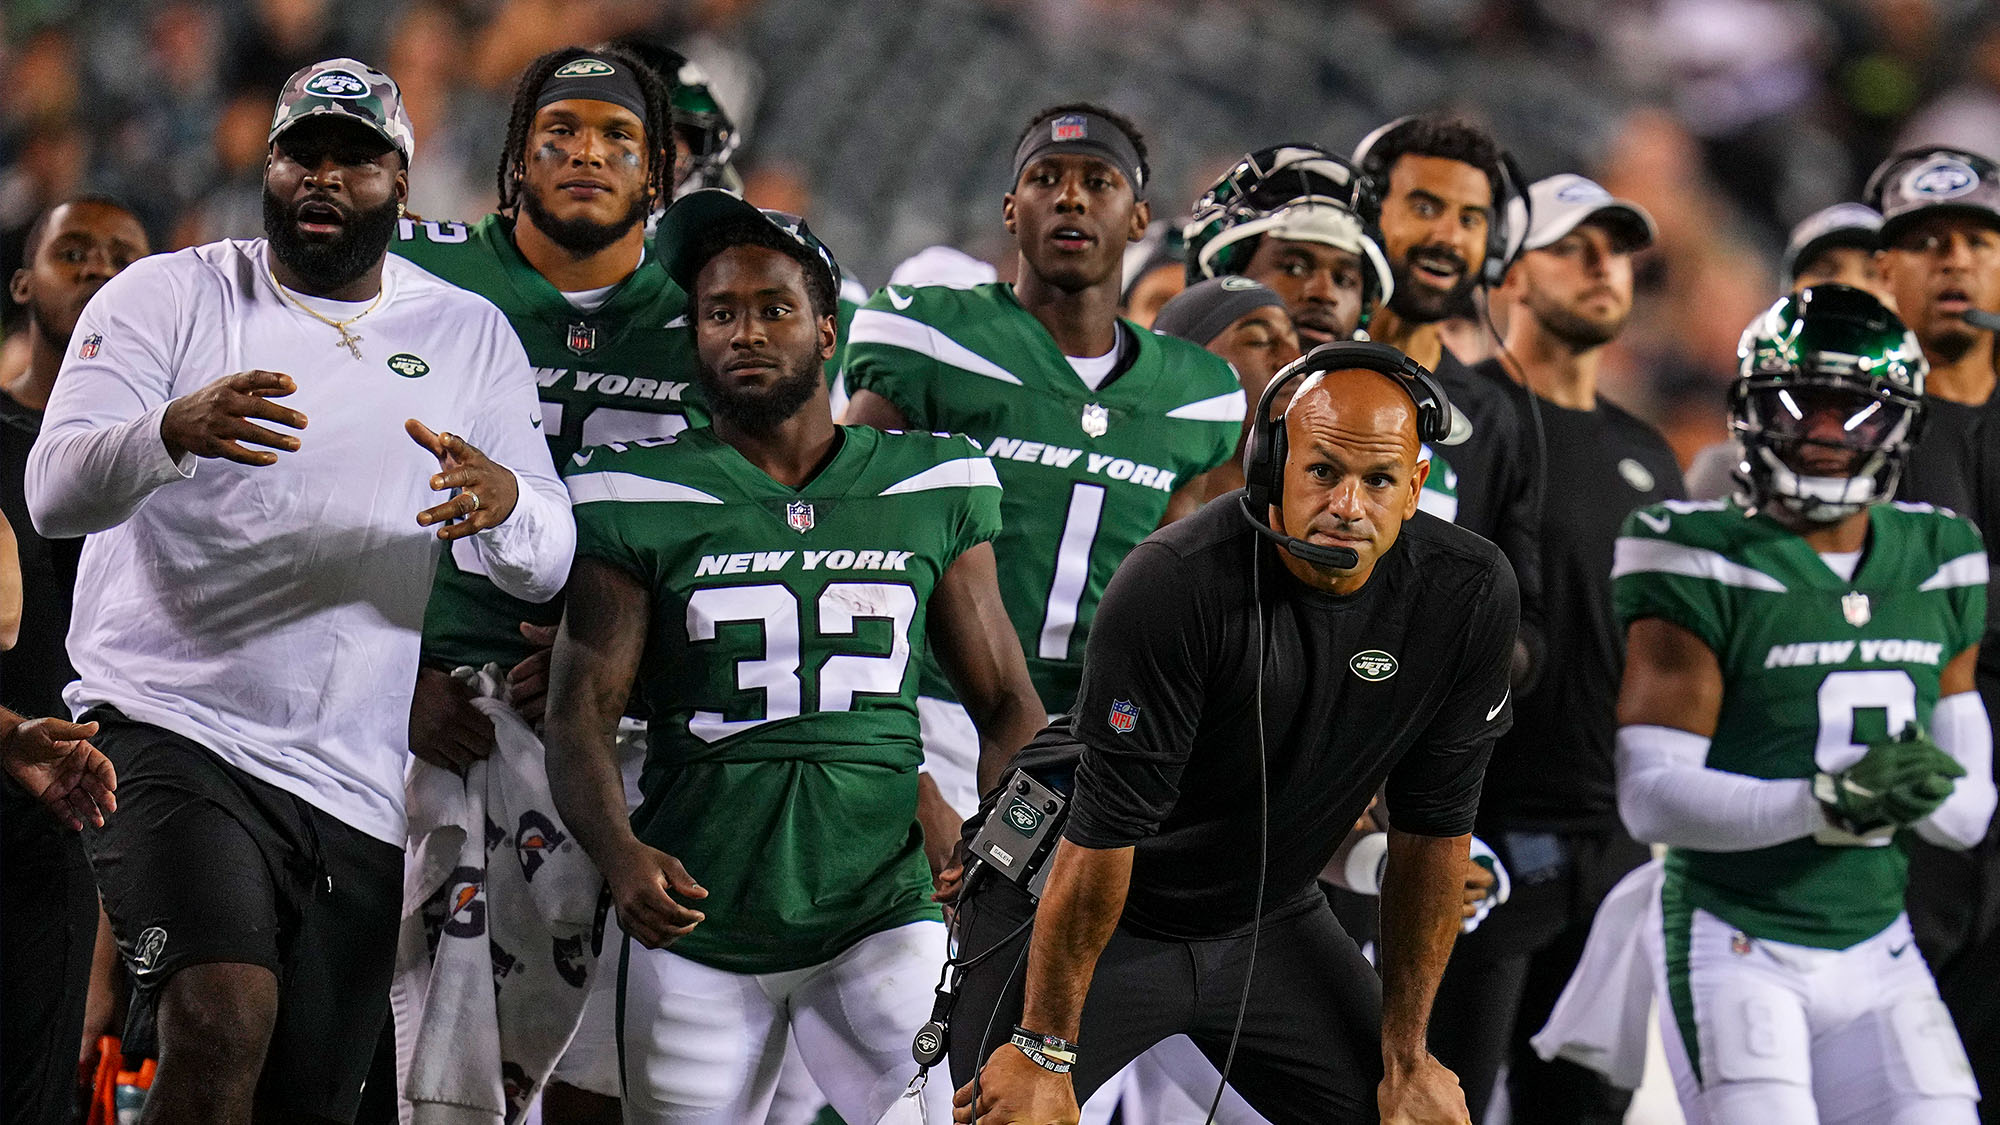 NY Jets' 2022 win total is set at 5.5: Is over or under the play?